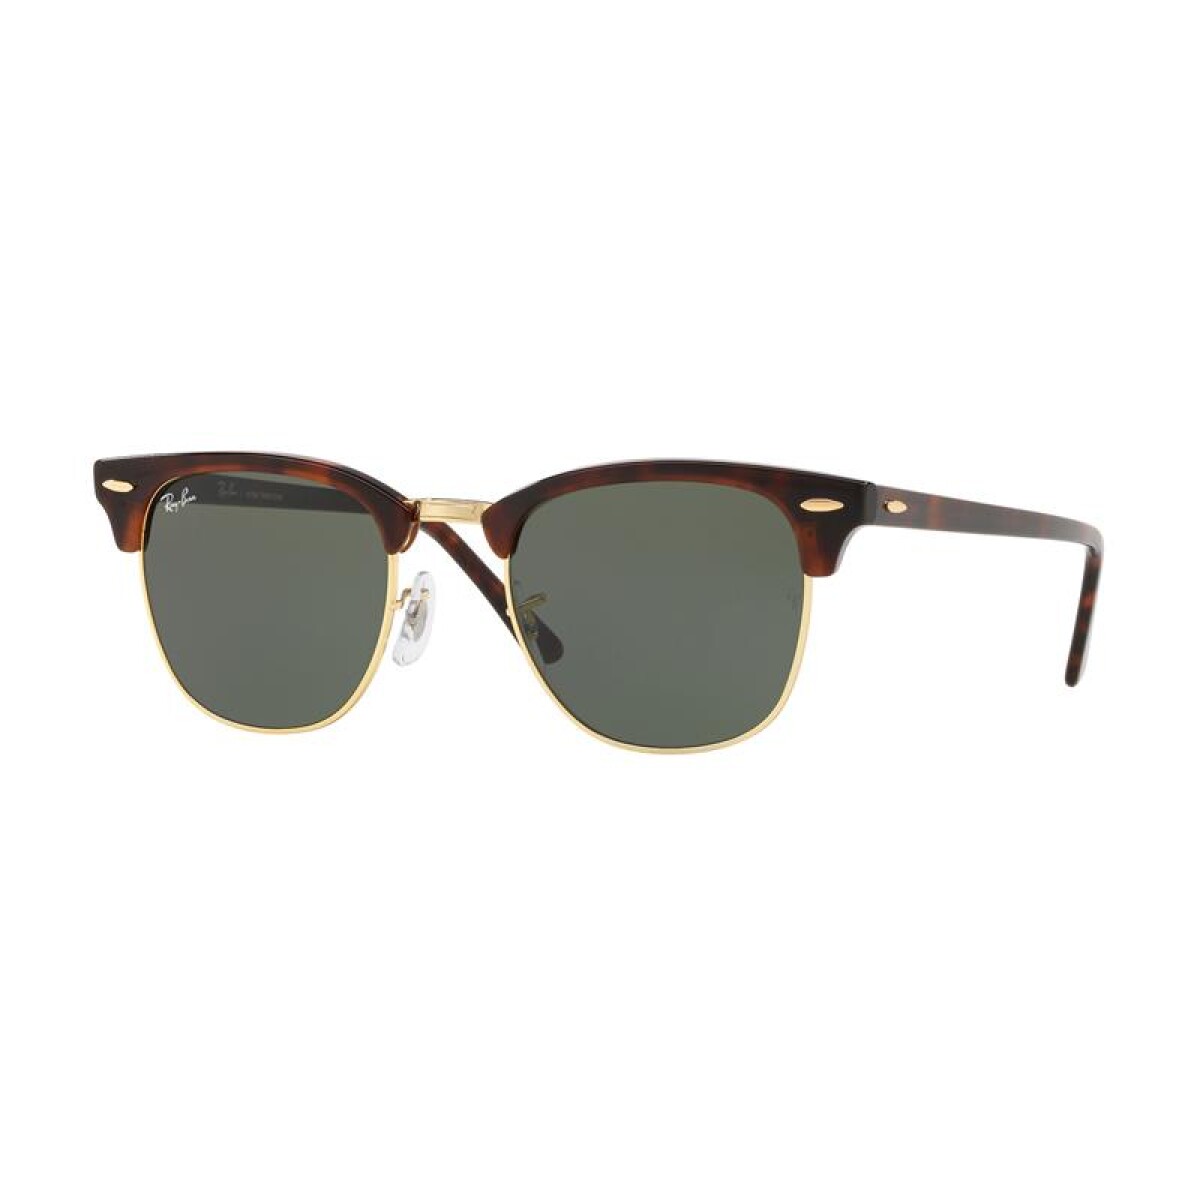 Ray Ban Rb3016 - W0366 